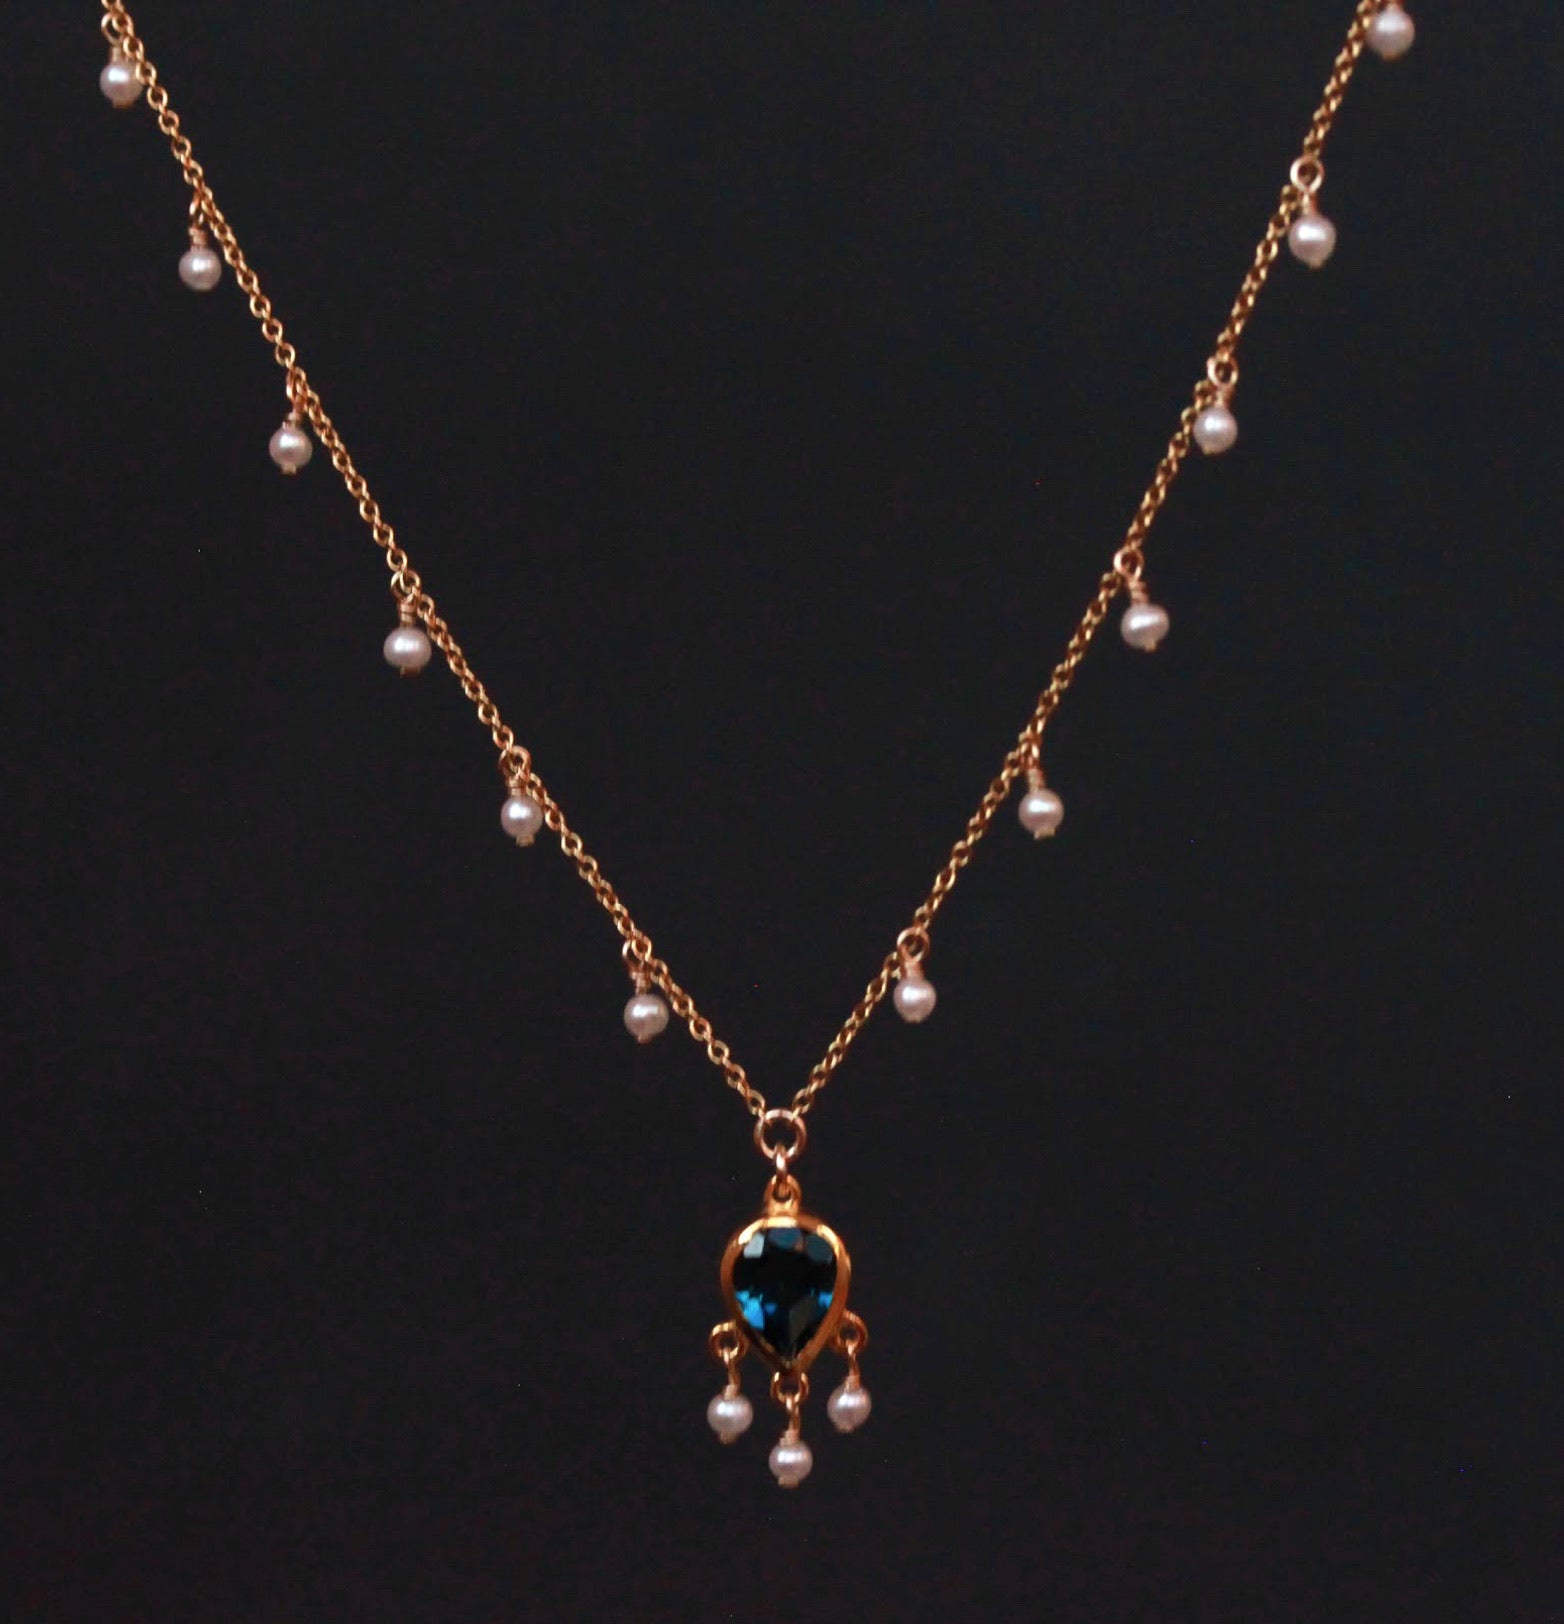 London Topaz Necklace with Seed Pearls